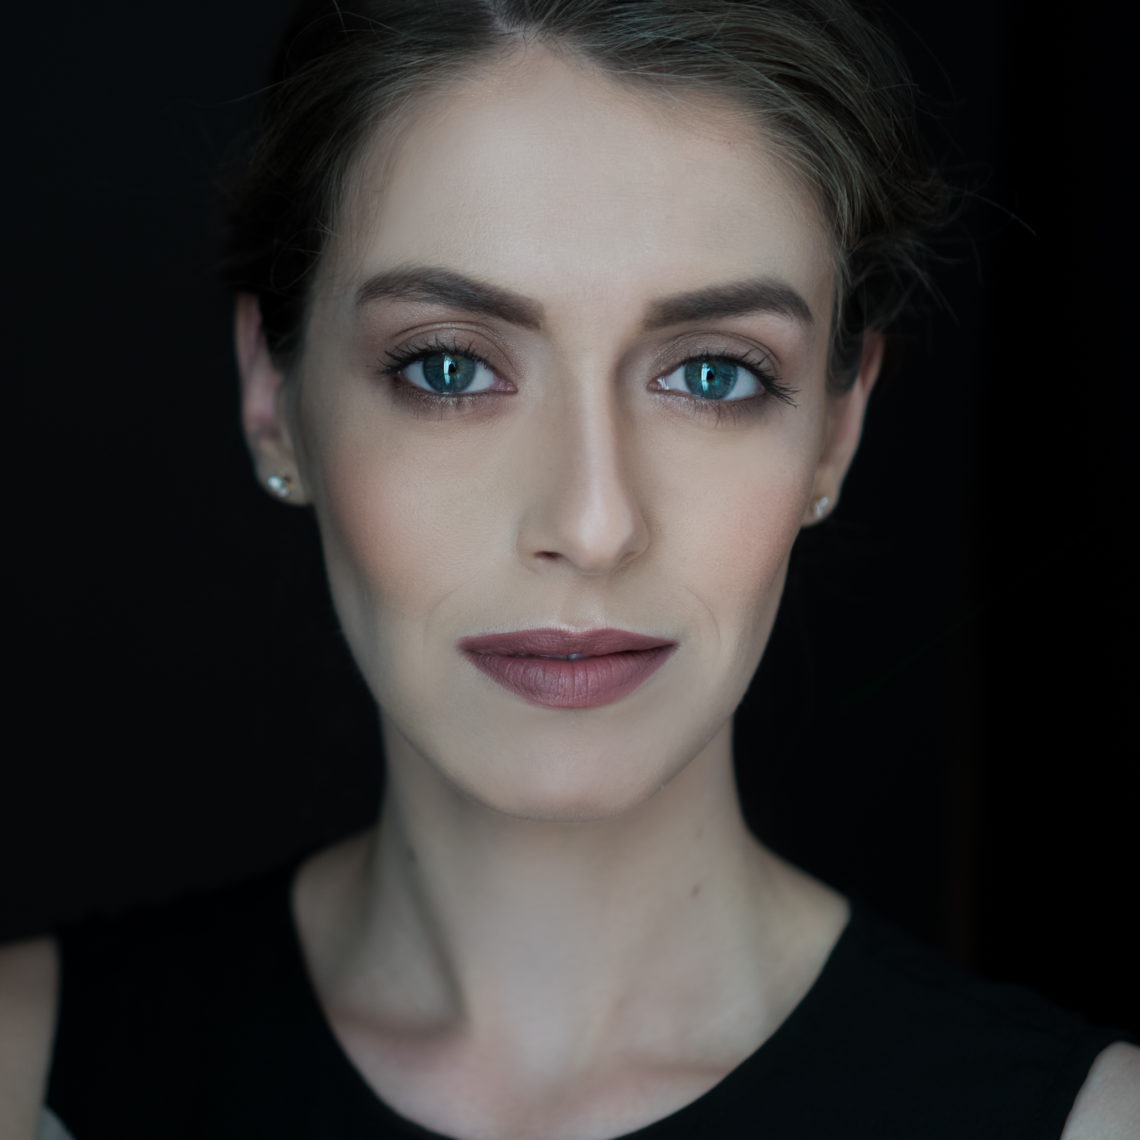 A woman with light skin and blue eyes, embodying the strength of women filmmakers, is looking directly at the camera. She is wearing a dark sleeveless top, subtle makeup, and small stud earrings. The black background makes her features stand out prominently.